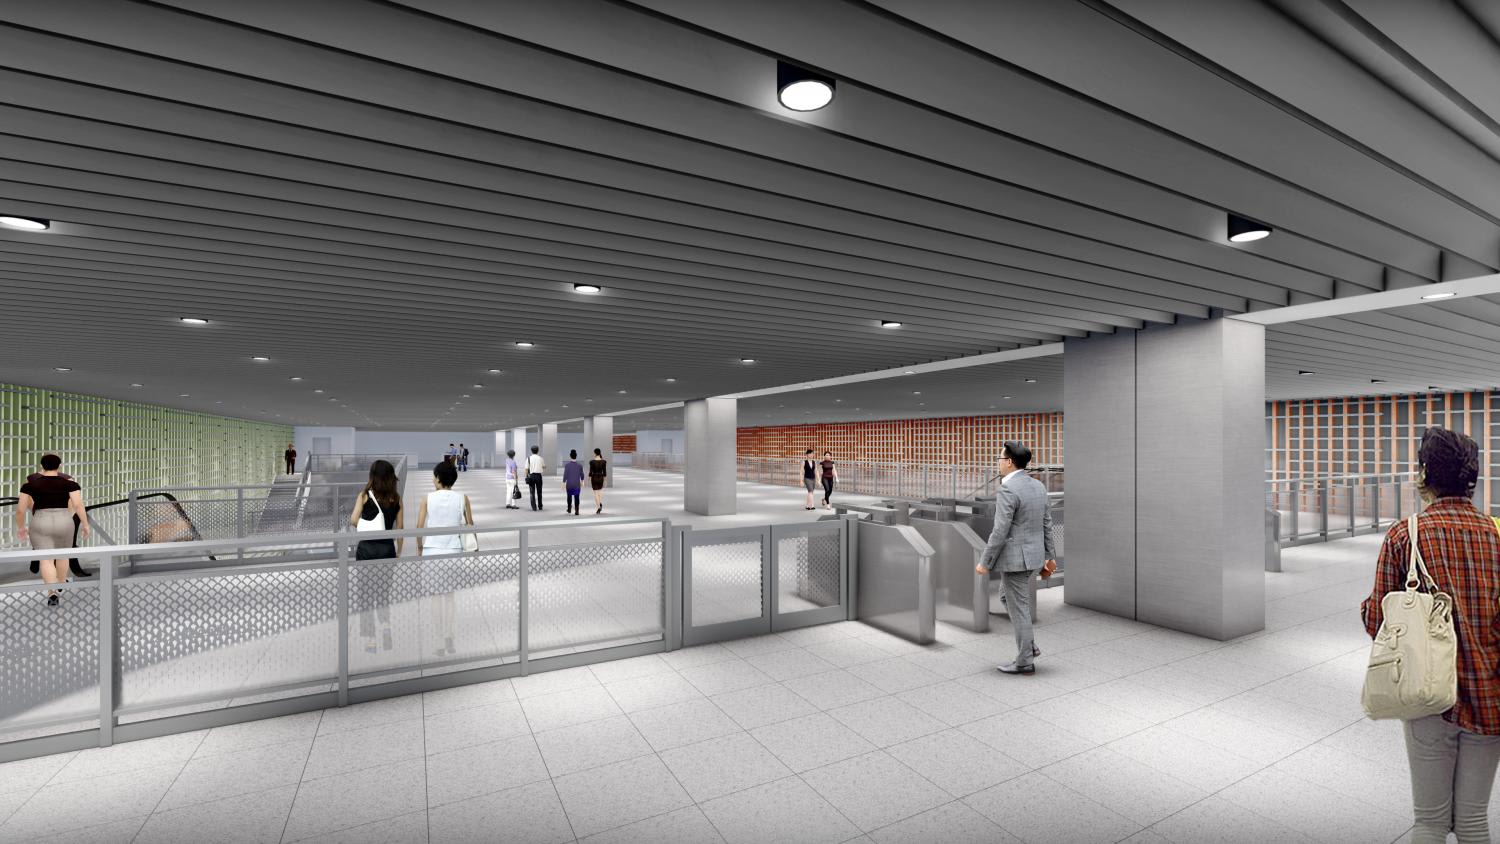 An artist's impression of the interior of an MRT station from the first phase of the Cross Island Line.